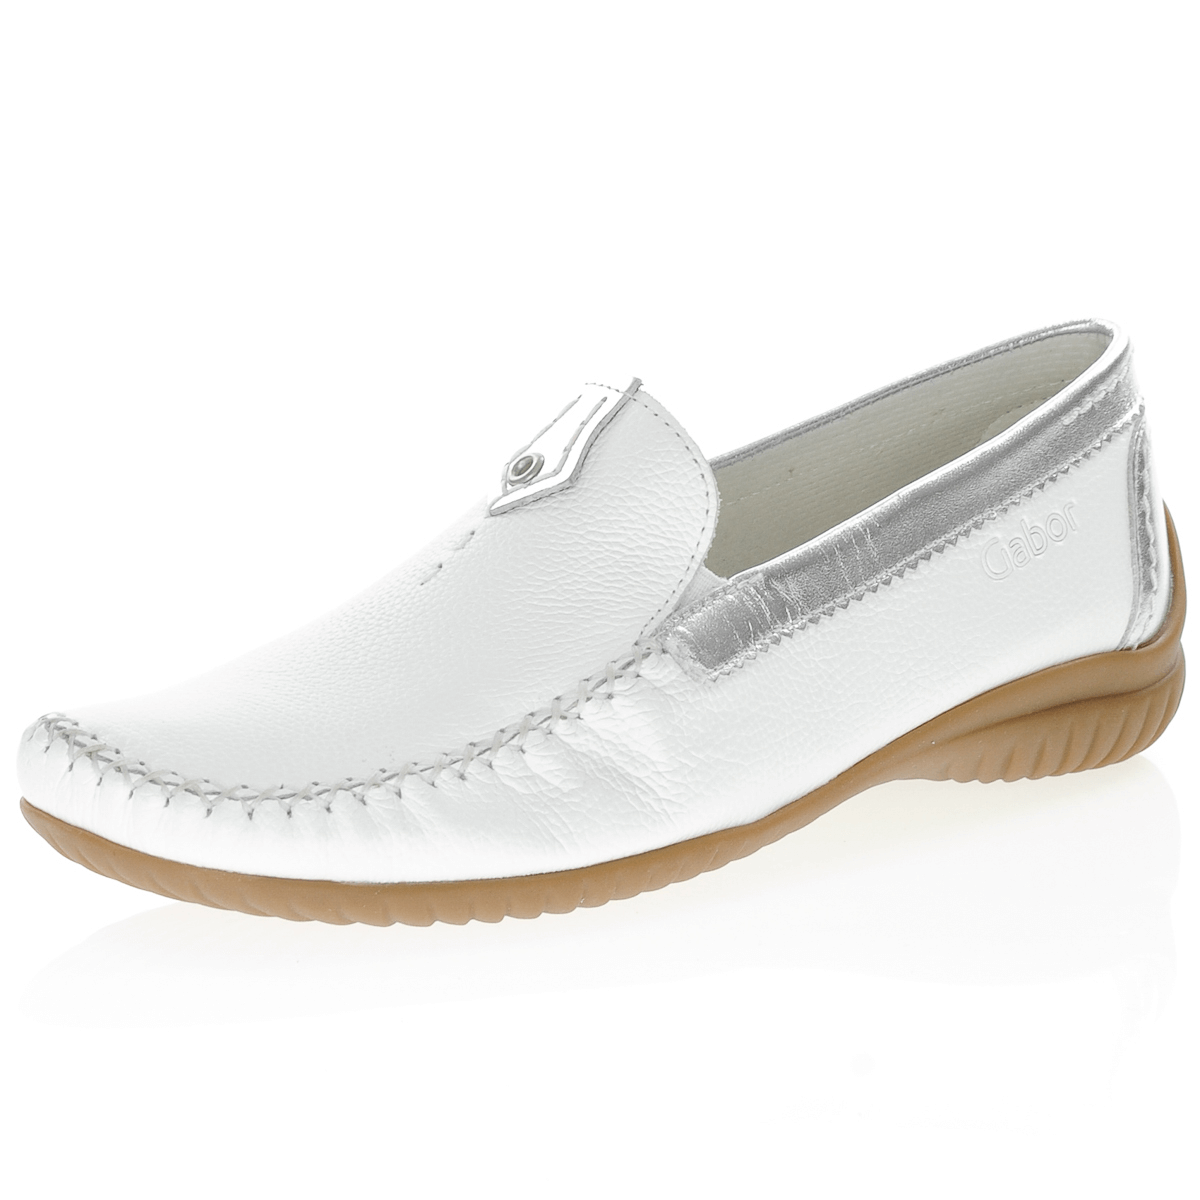 Gabor - Leather Moccasins White - Shoe Horn